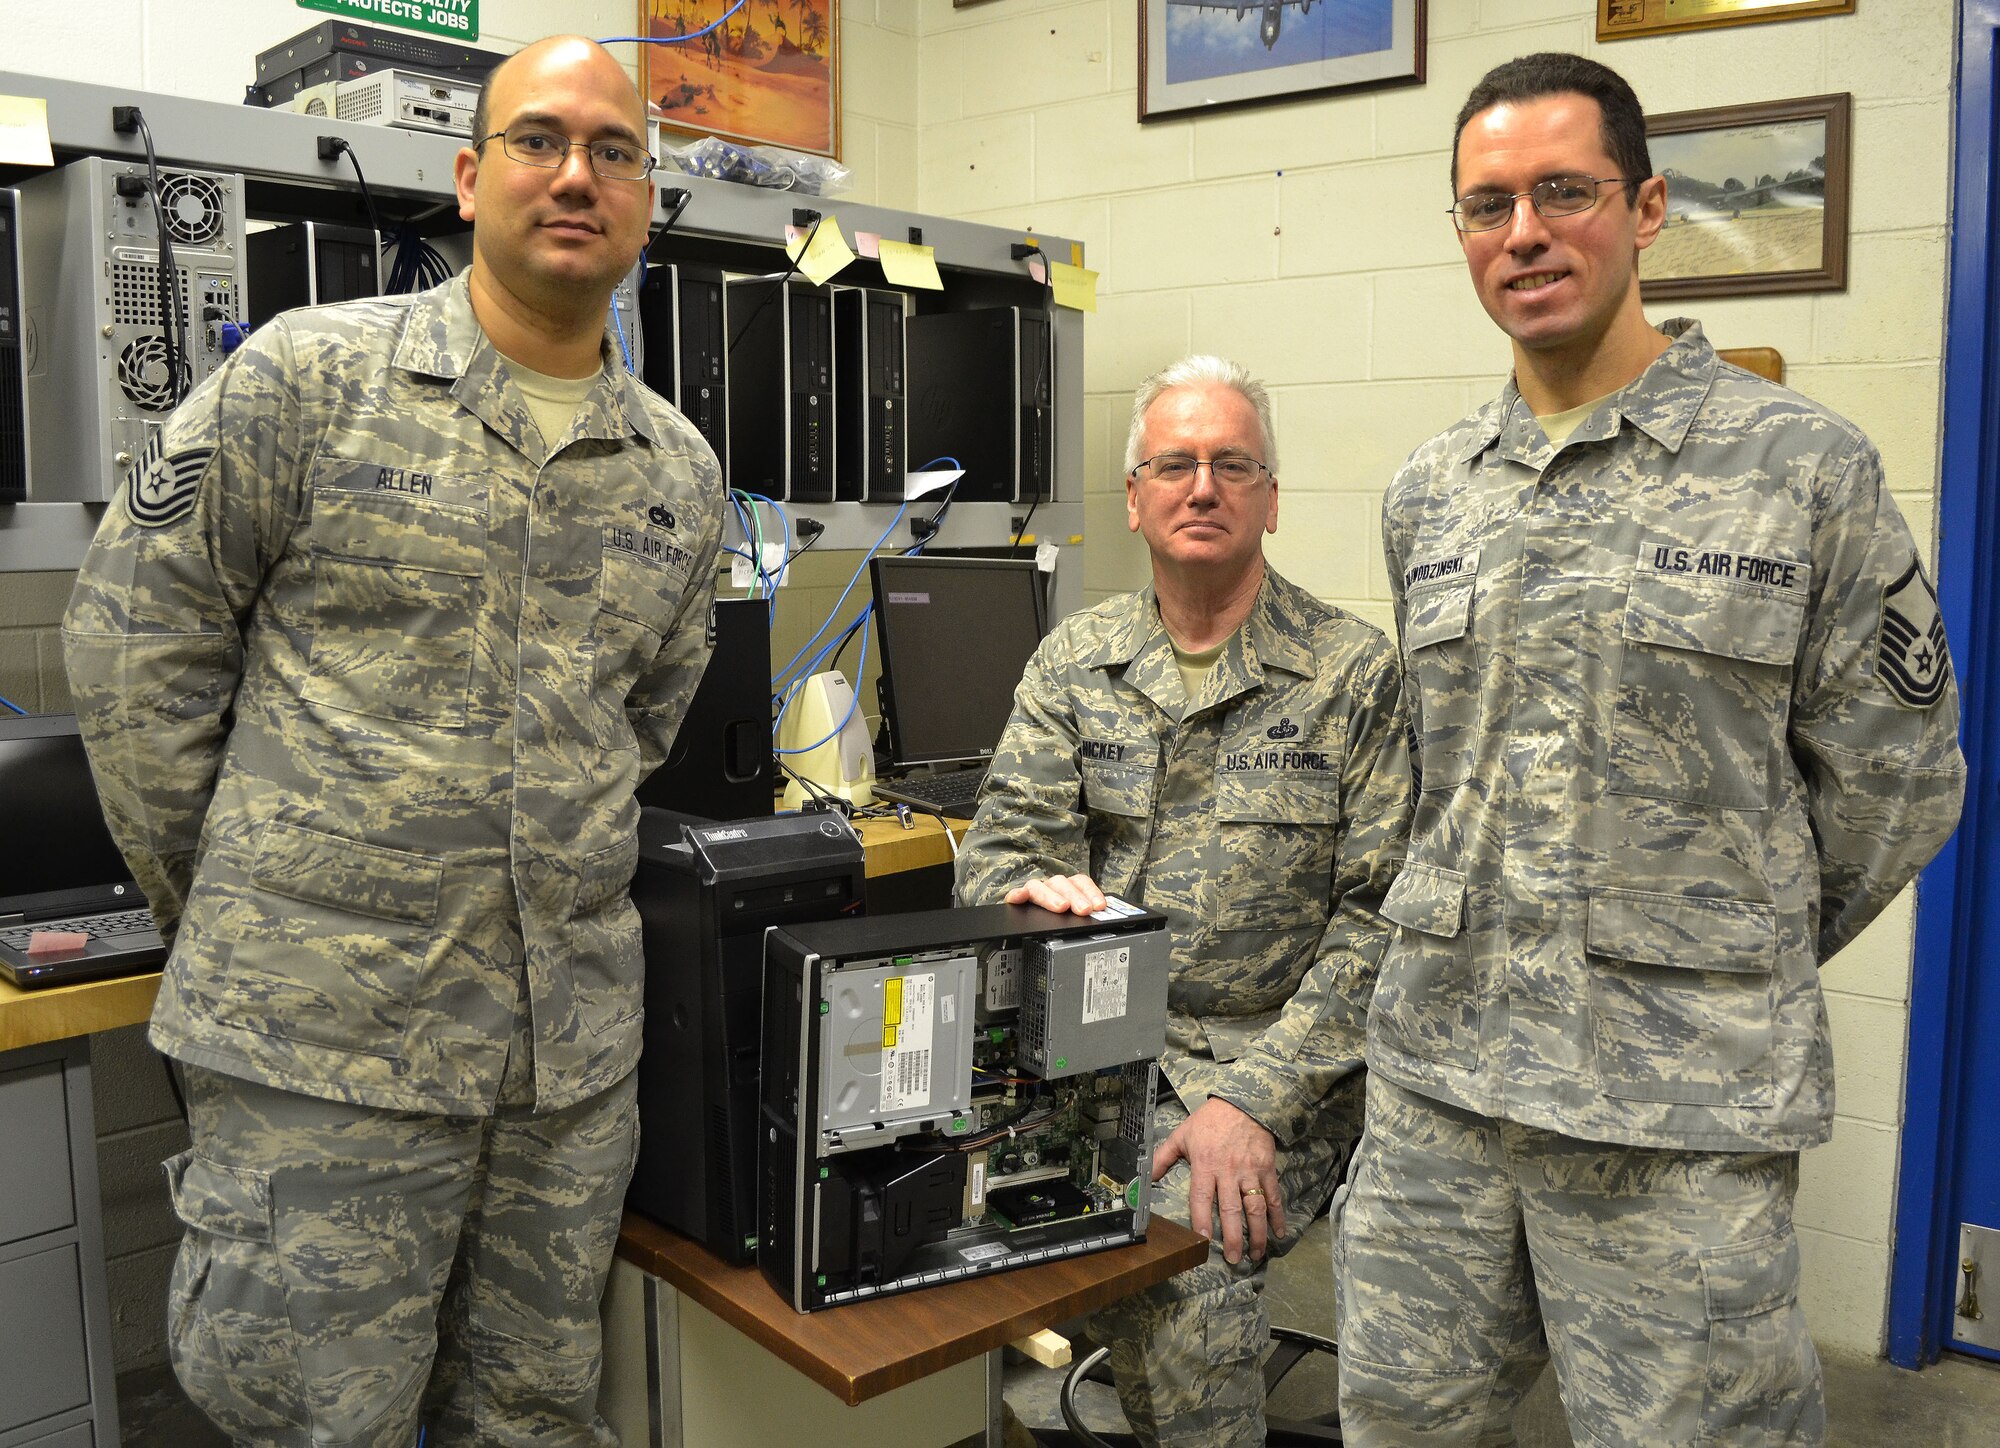 Tech. Sgt. Derrick Allen (left) Chief Master Sgt. Thomas Hickey and Master Sgt. Ken Paliwodzinski from the 111th Communications Flight stop working to take a photo Jan. 23, 2015 at Horsham Air Guard Station, Pa. The three Airmen are key technicians for the pending Air National Guard Air Force Network (AFNet) migration scheduled to begin here in March. Allen and Paliwodzinski attended Federated Administration Rights training in November, at Joint Base San Antonio-Randolph, Texas, as part of the slated program implementation. (U.S. Air National Guard photo by Master Sgt. Christopher Botzum/Released)
